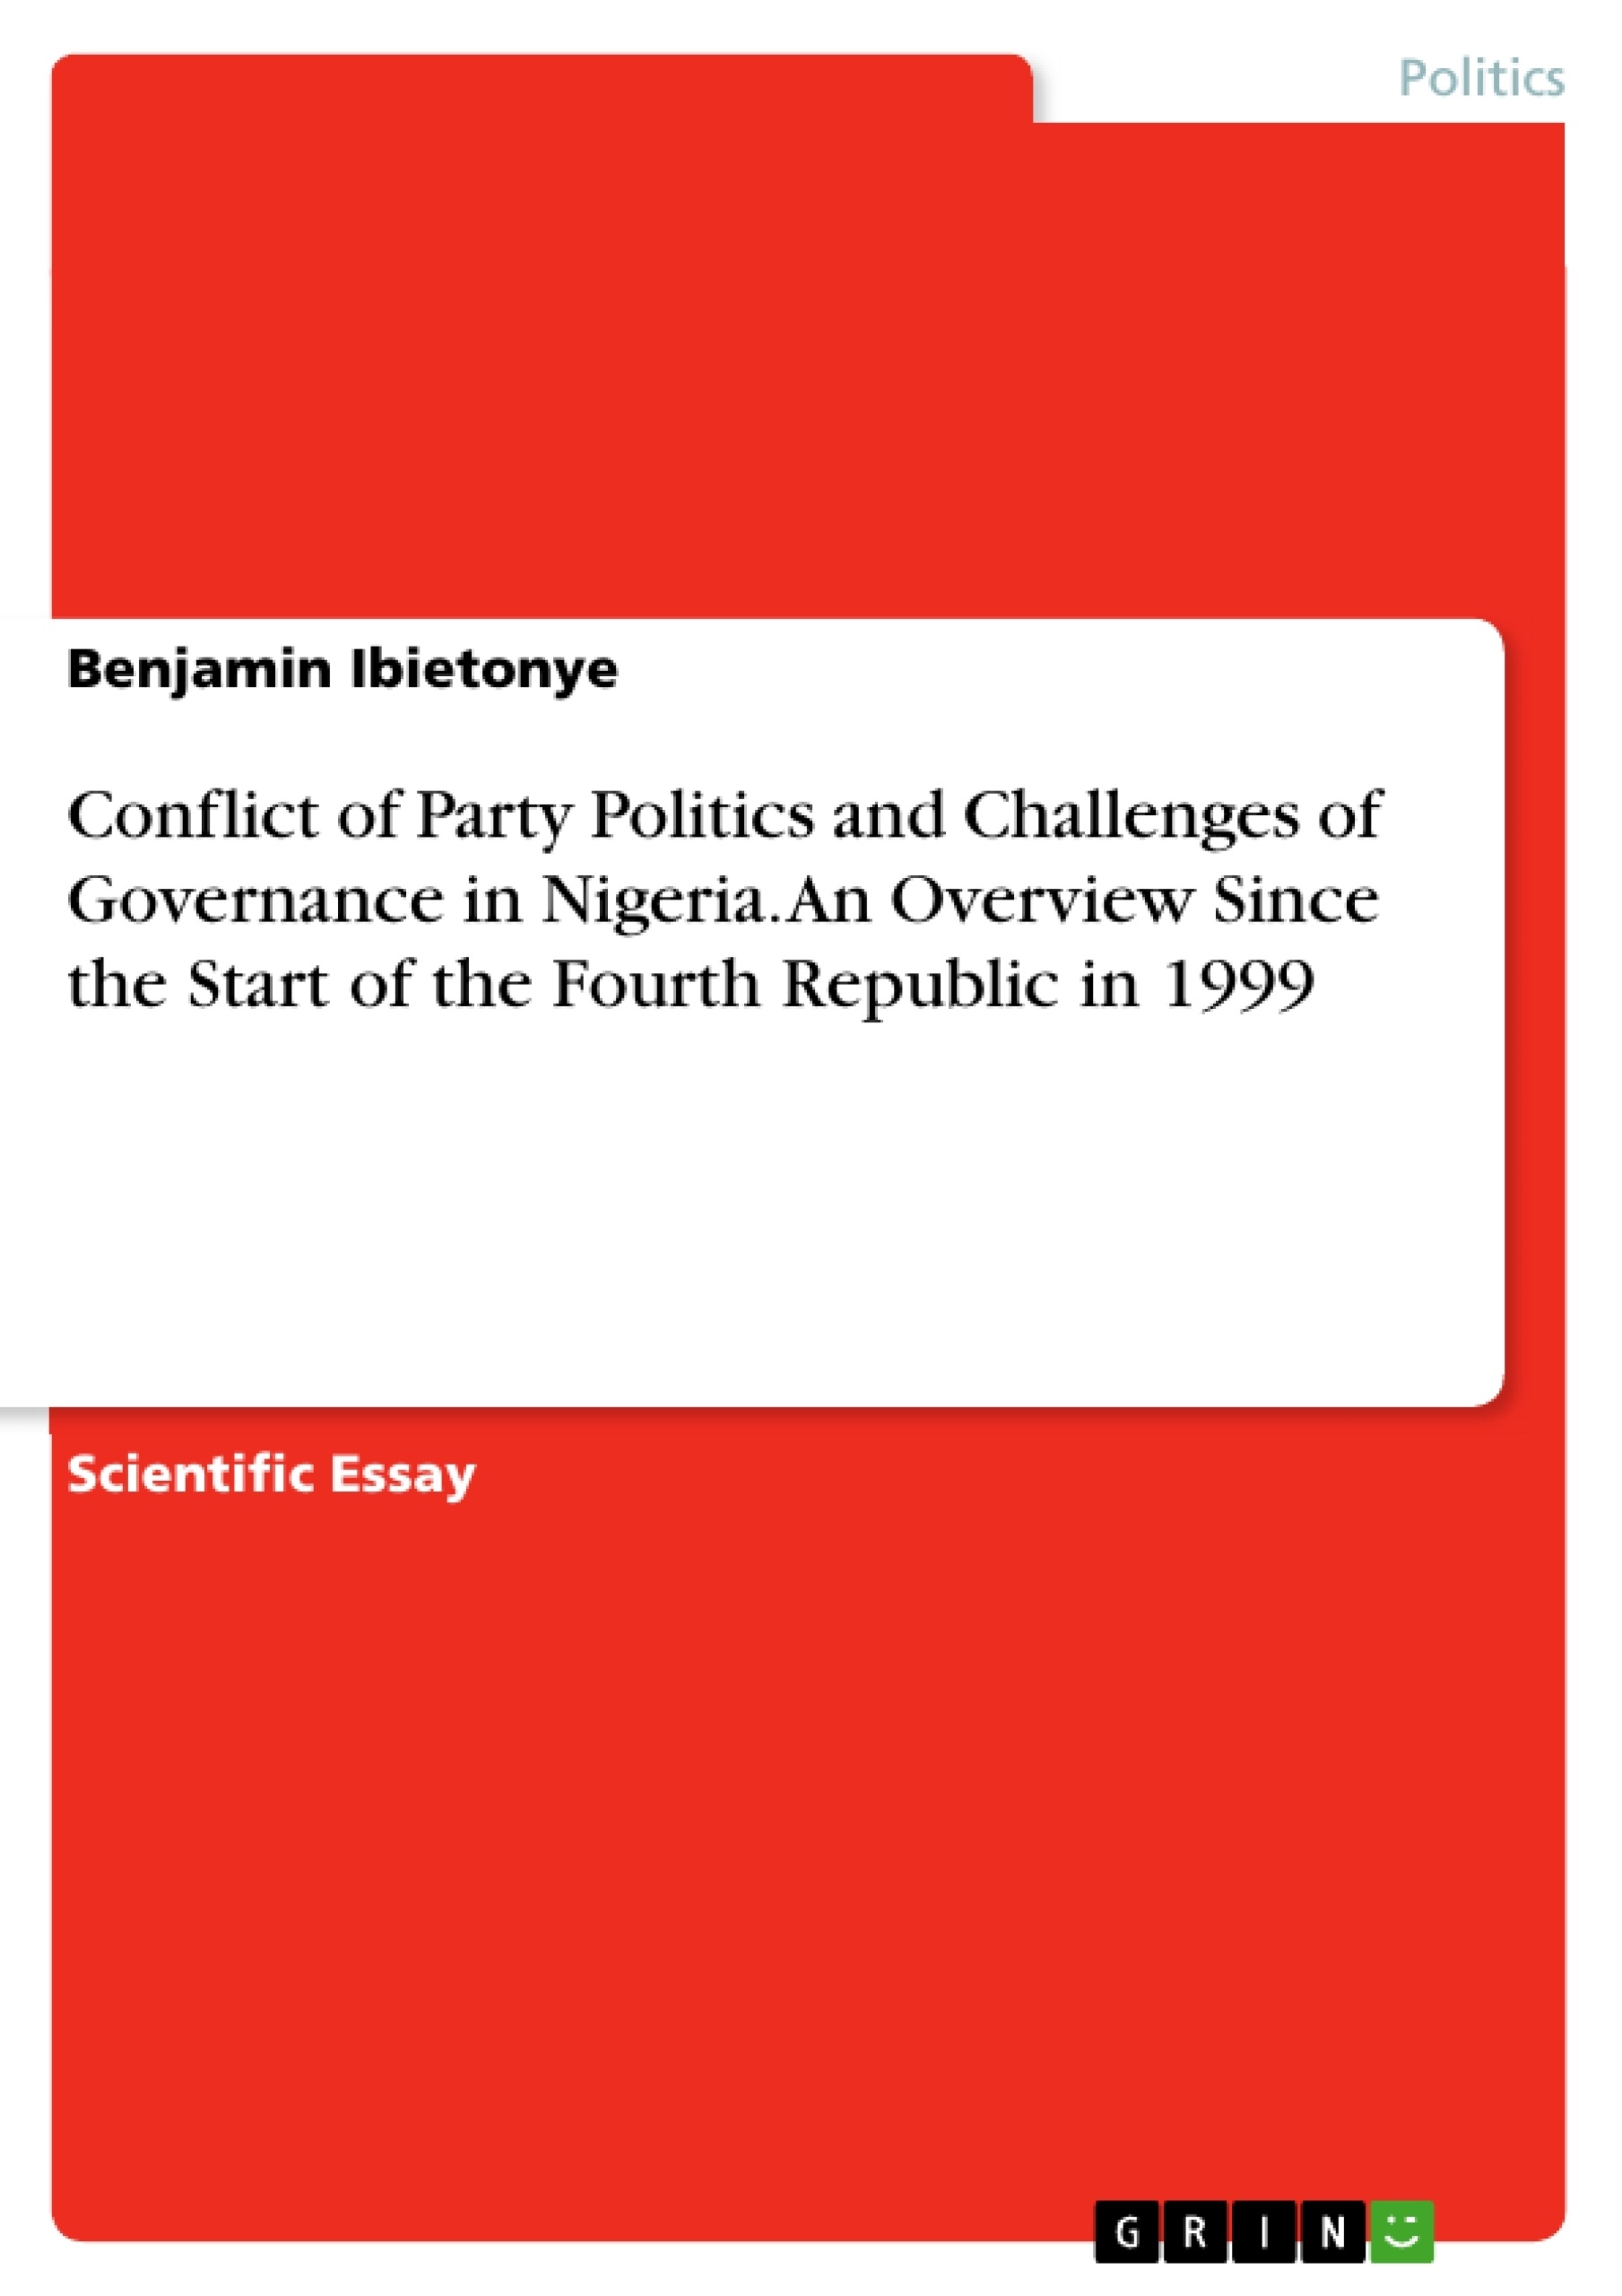 Title: Conflict of Party Politics and Challenges of Governance in Nigeria. An Overview Since the Start of the Fourth Republic in 1999